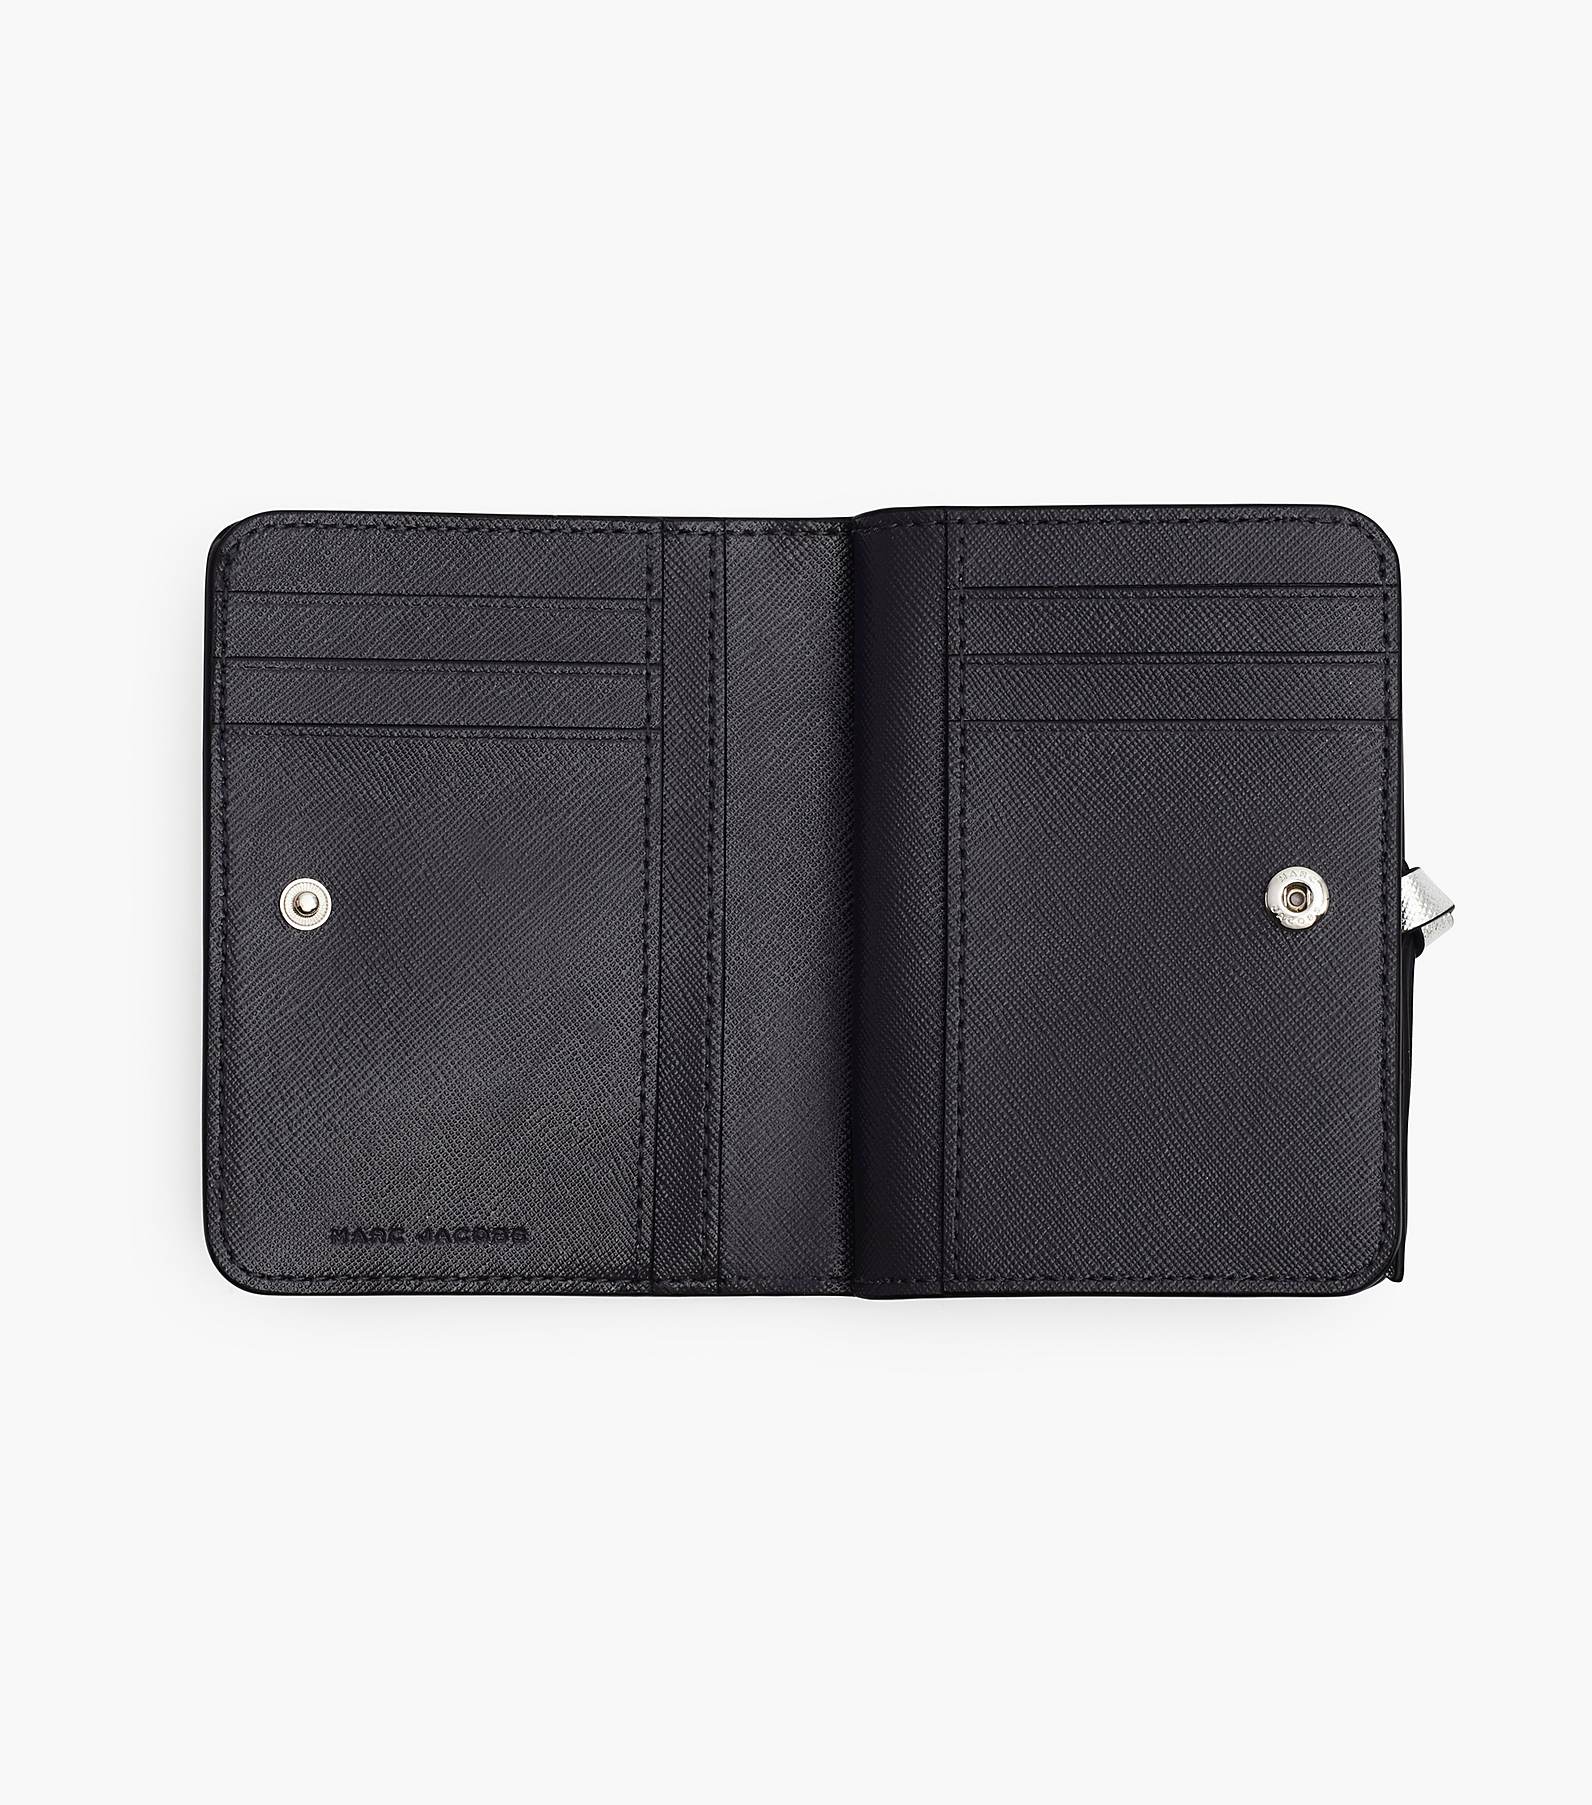 THE UTILITY SNAPSHOT COMPACT WALLET MINI